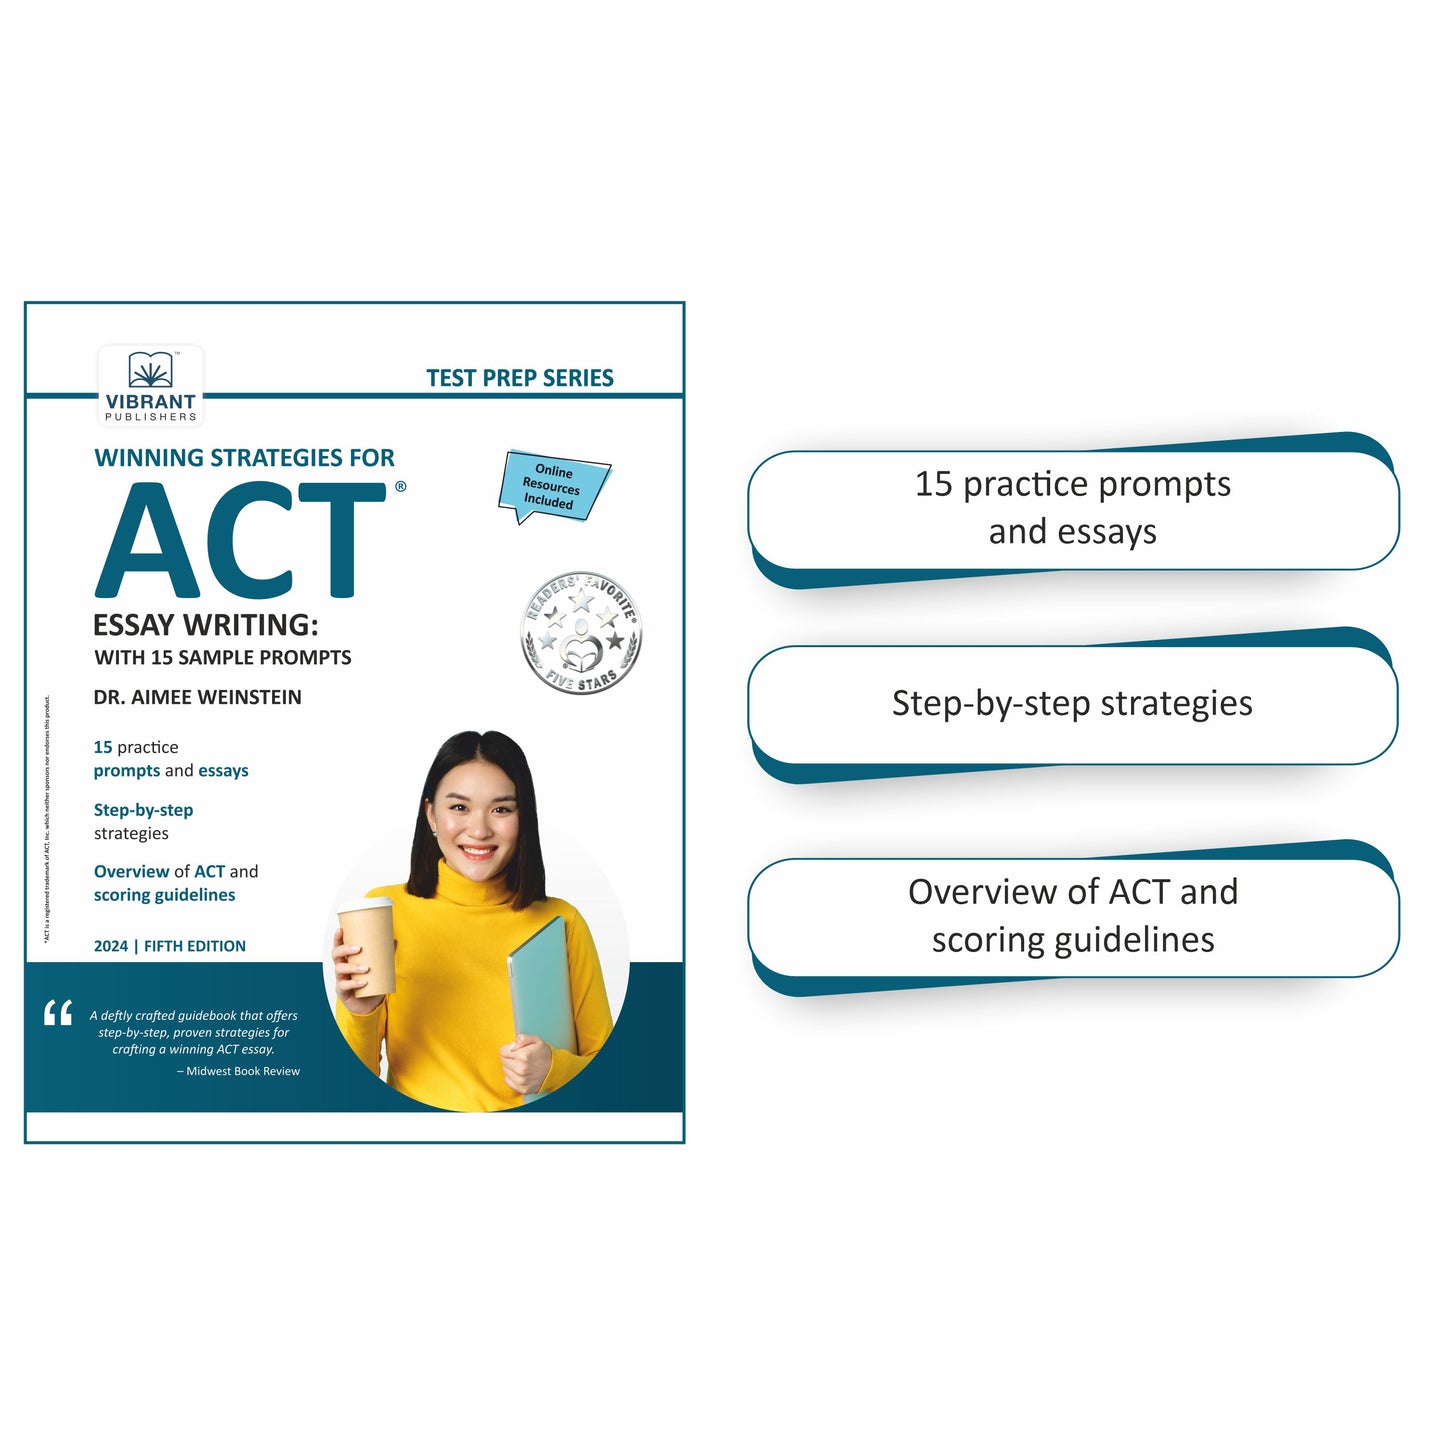 Winning Strategies For ACT Essay Writing: With 15 Sample Prompts (2024 Edition)